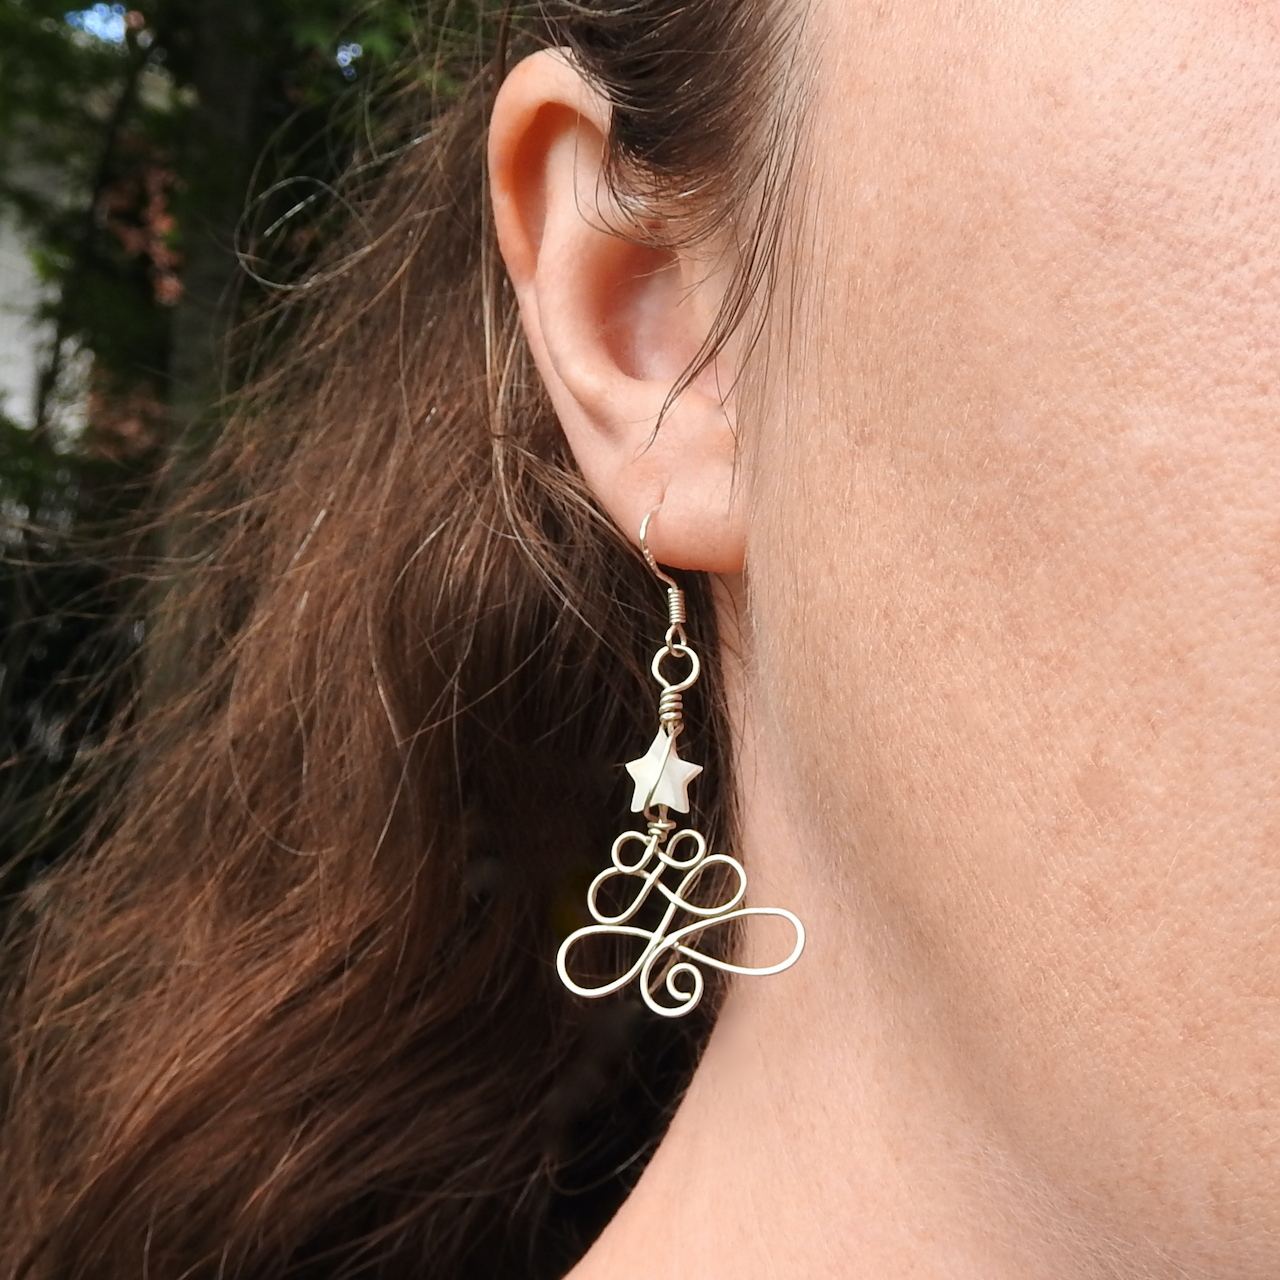 Front on photo of model wearing the Christmas tree earrings with white star